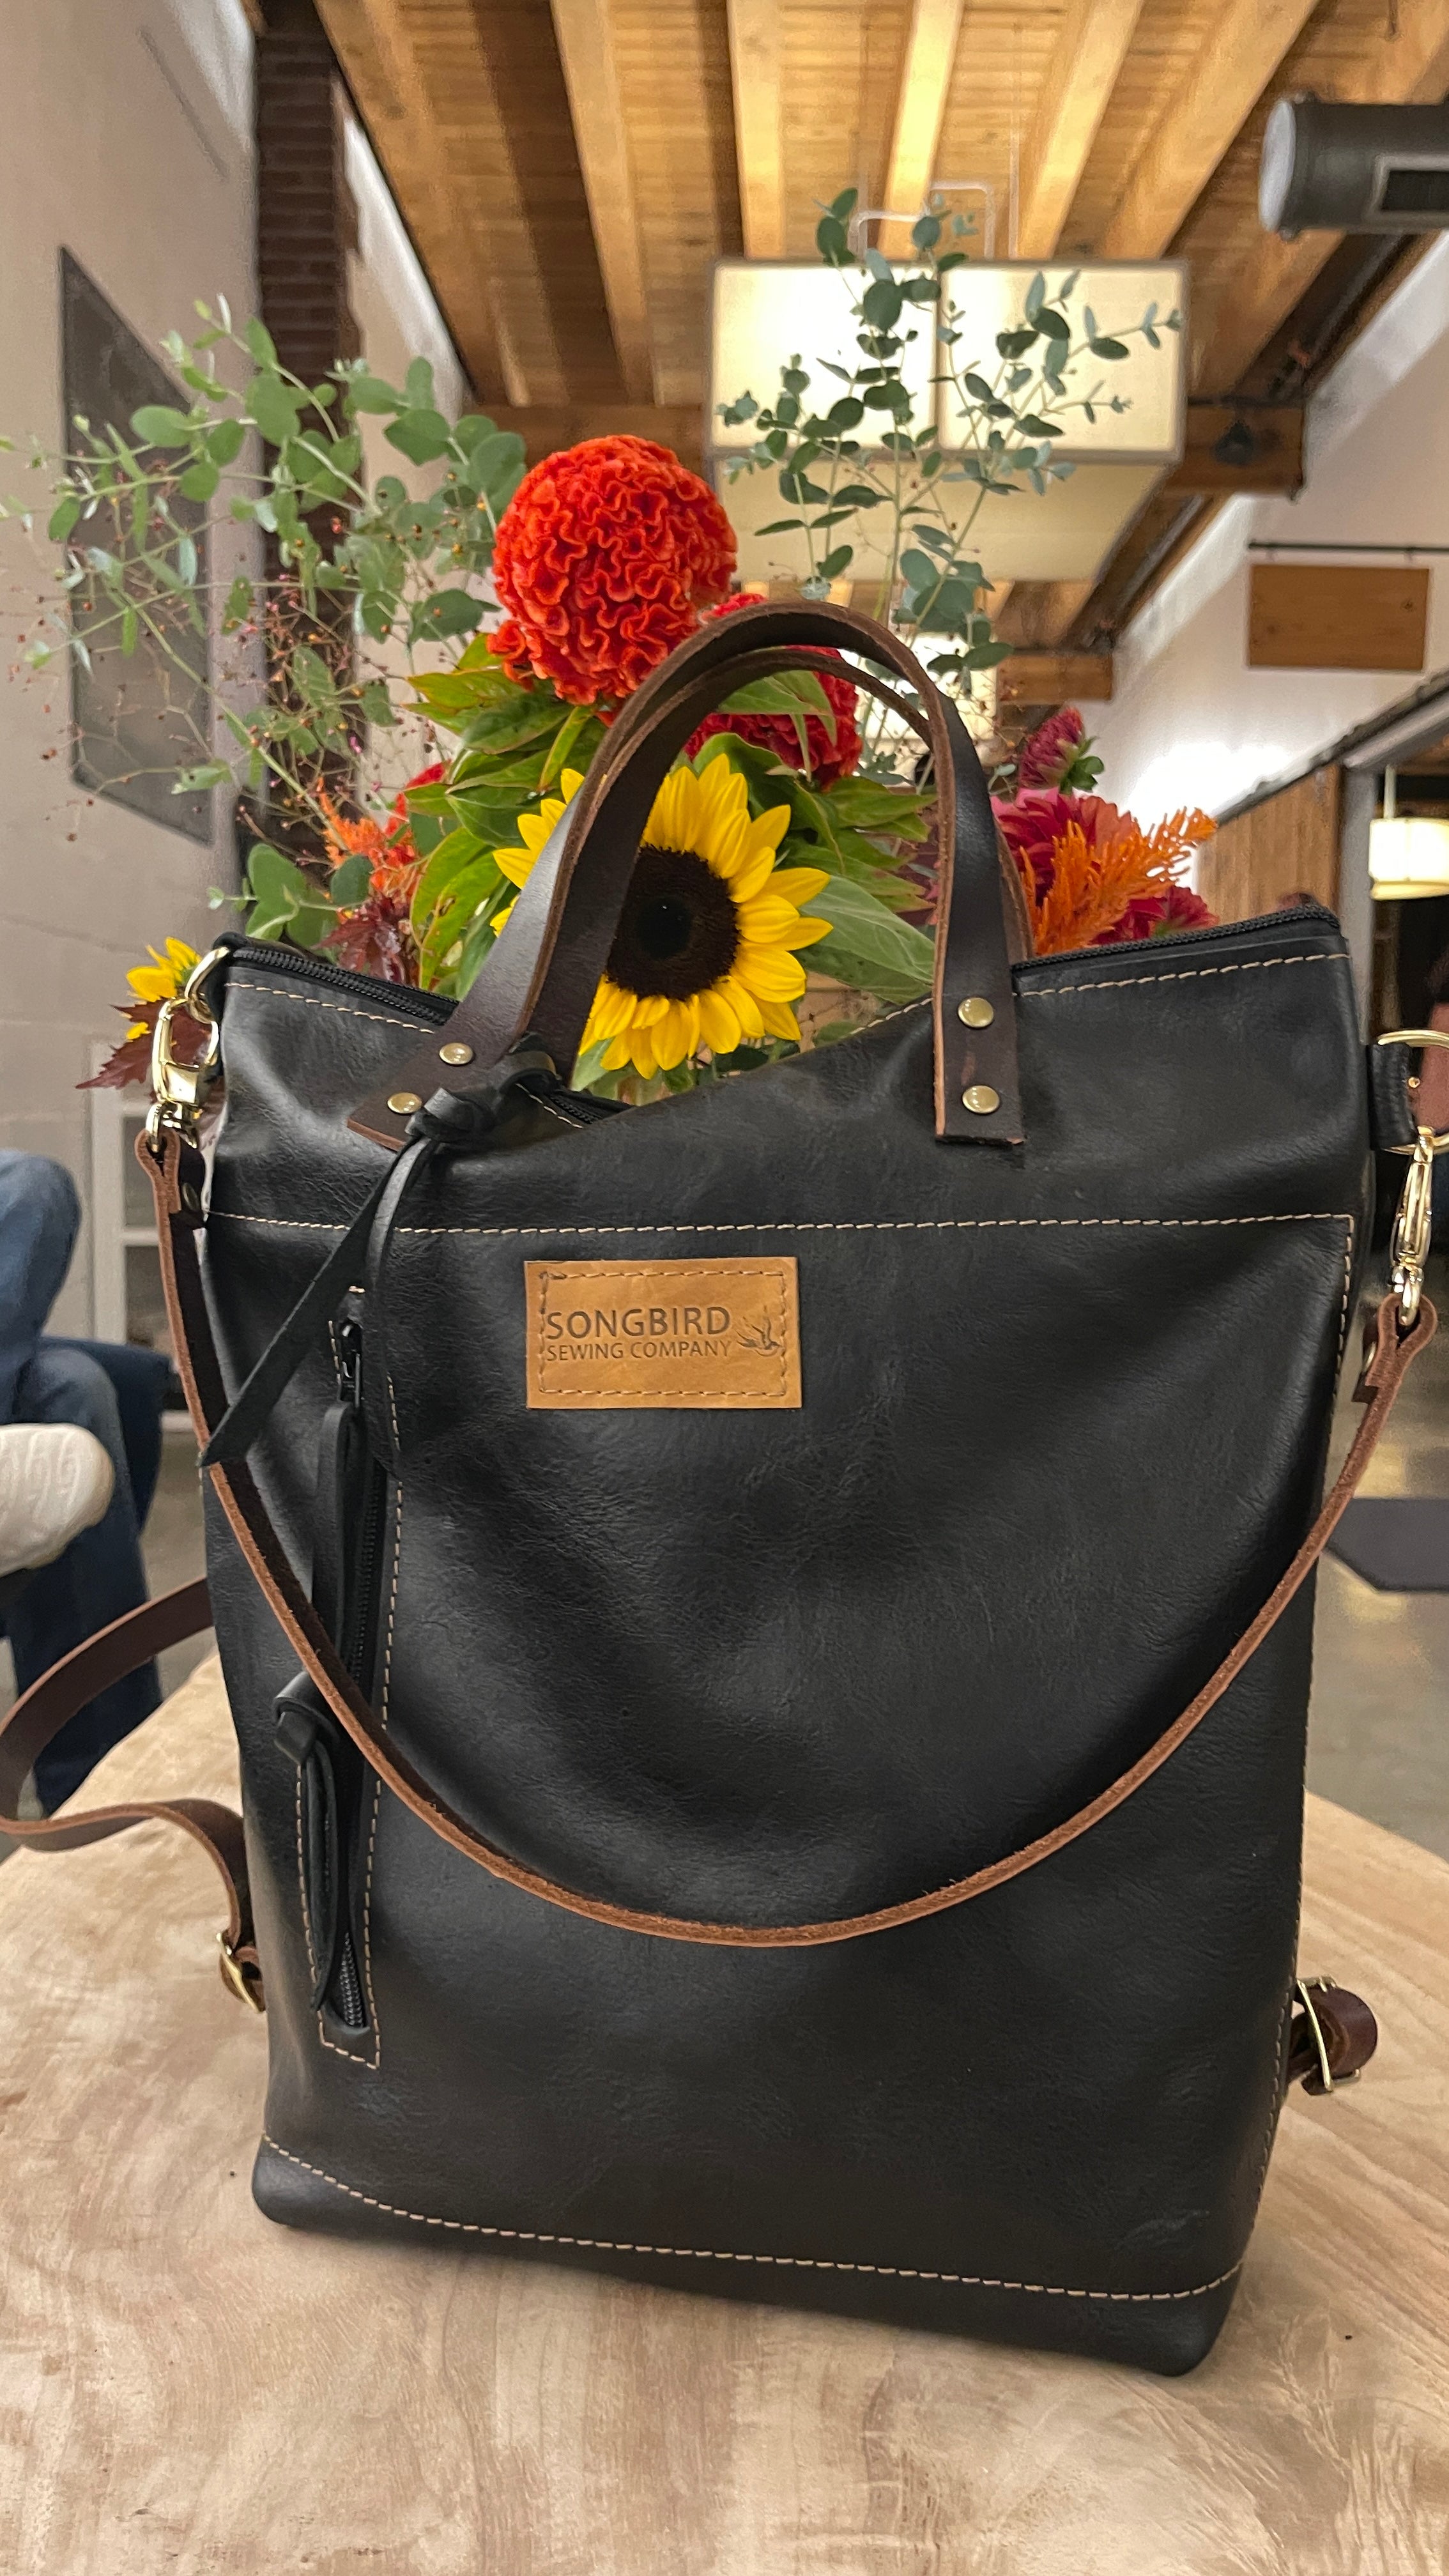 Songbird Leather Backpack - The Original